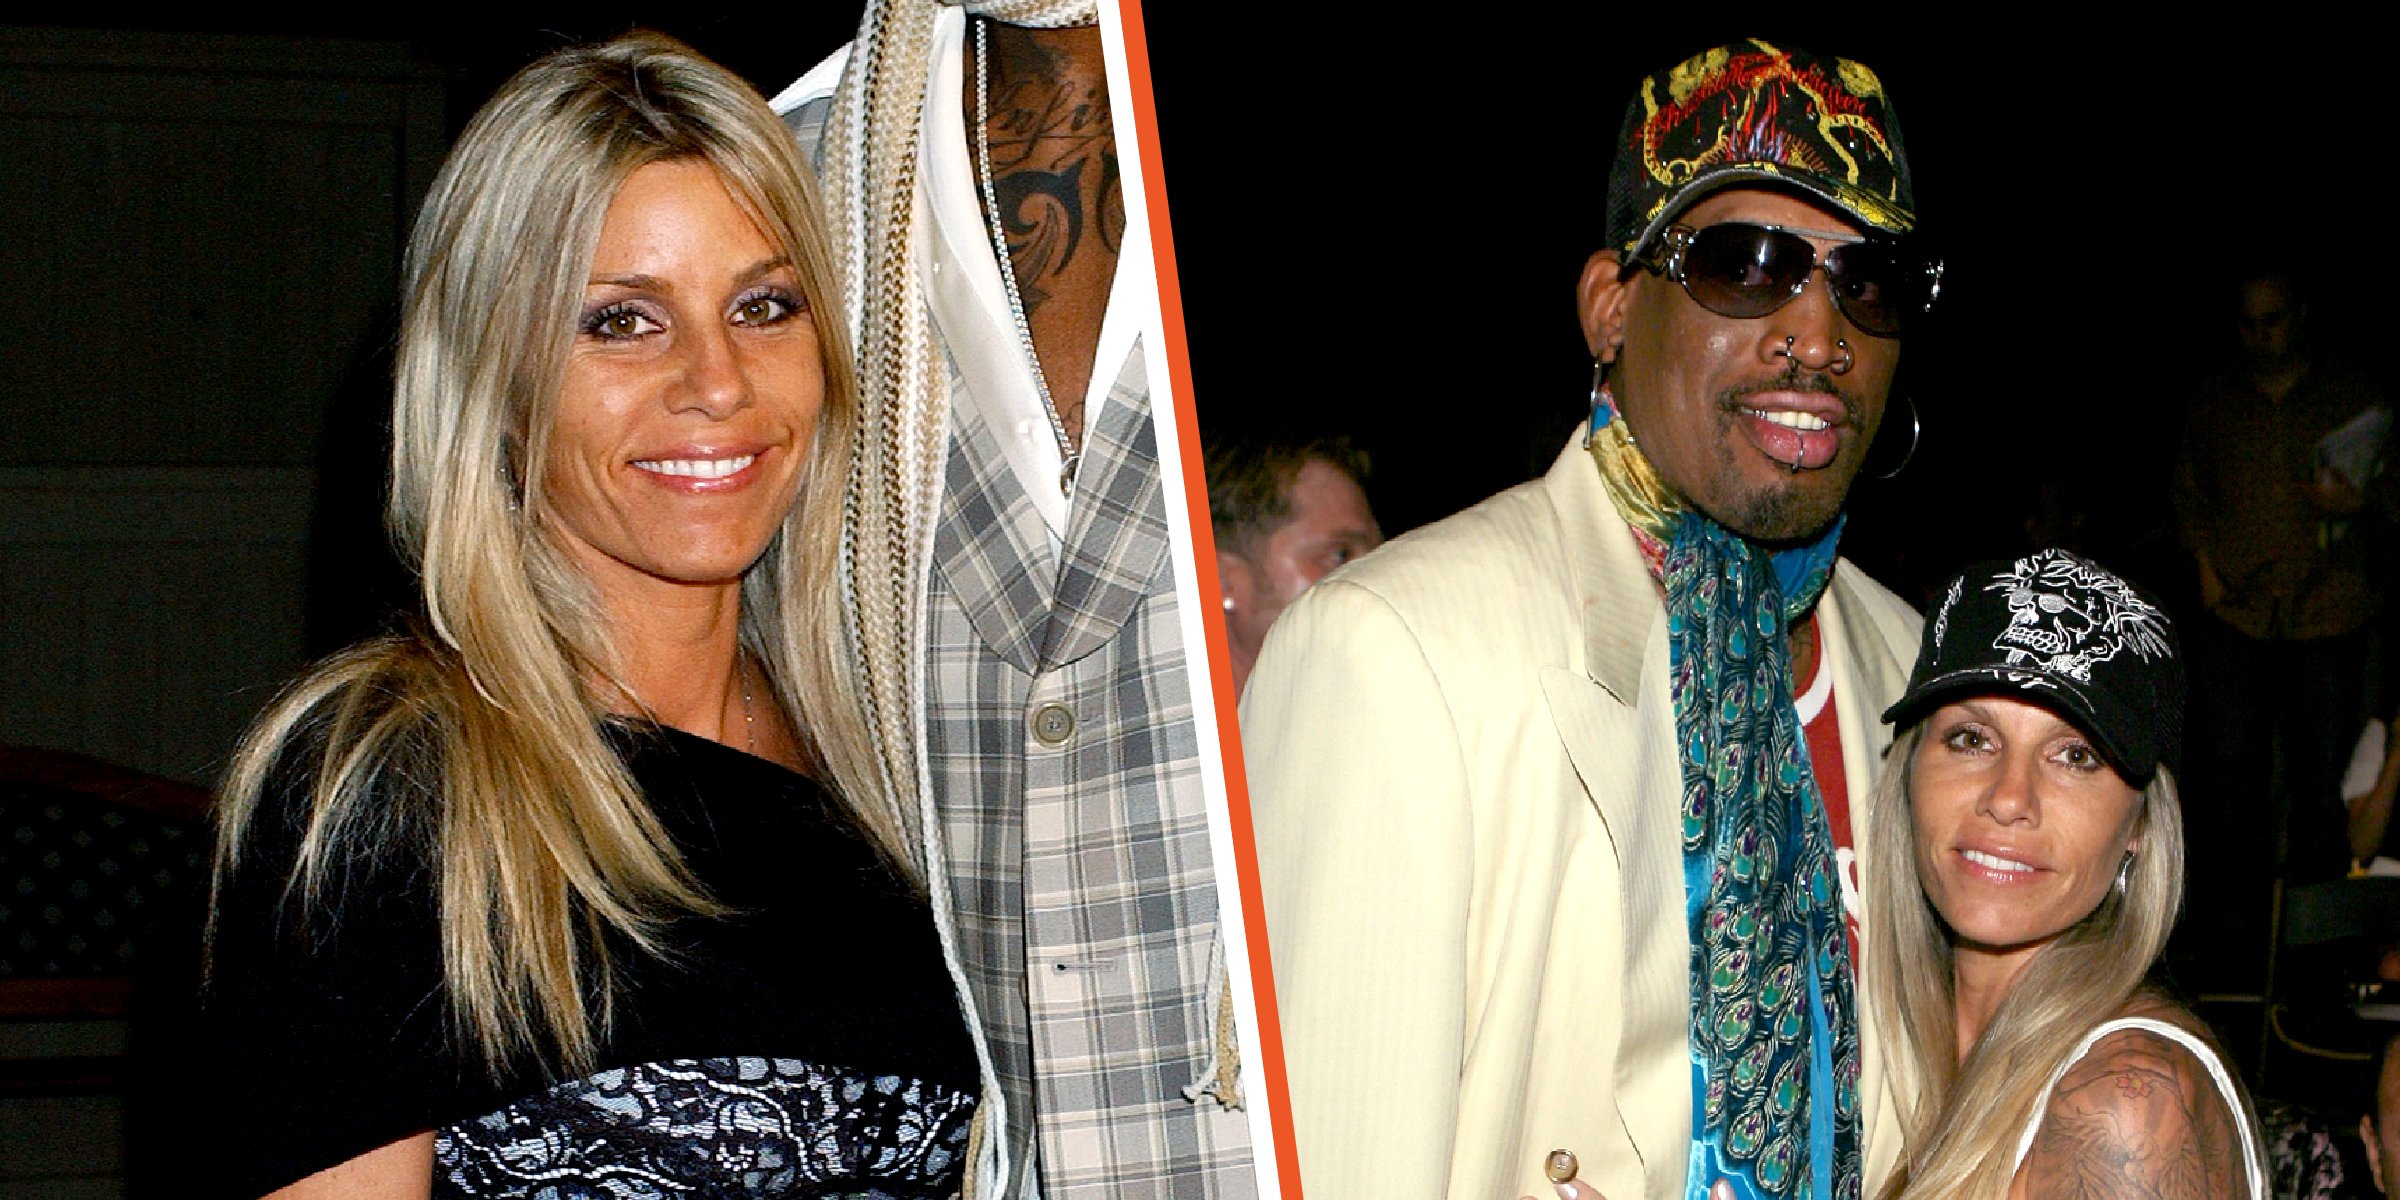 Michelle Moyer | Michelle Moyer and Dennis Rodman | Source: Getty Images